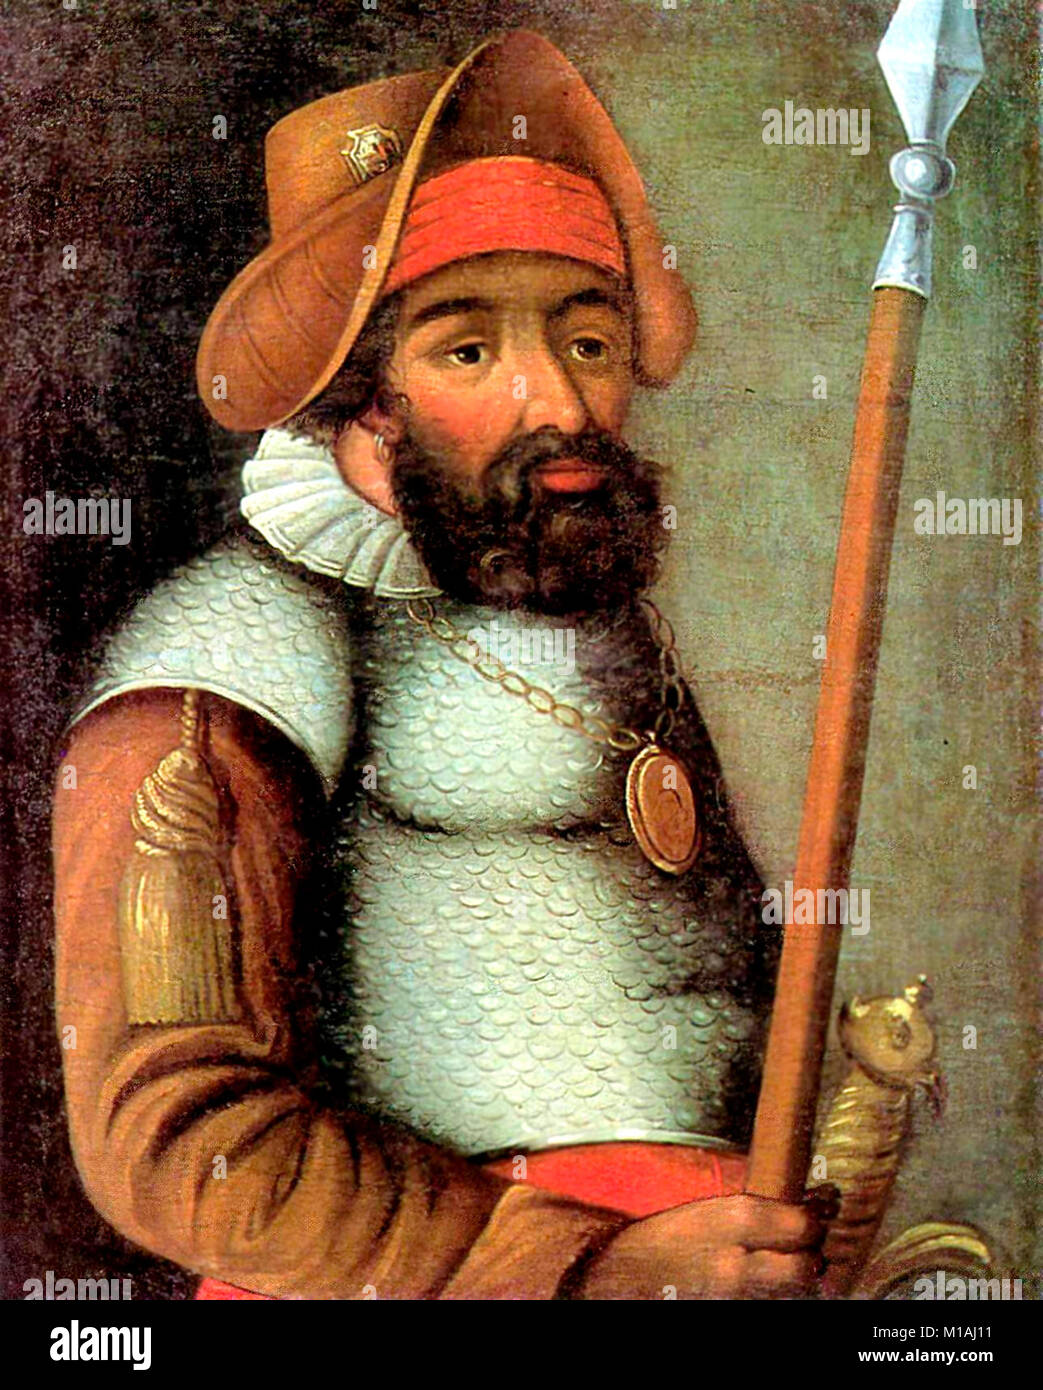 Yermak Timofeevich, conqueror of Siberia. Cossack ataman who started the Russian conquest of Siberia, in the reign of Tsar Ivan the Terrible. 1500s Stock Photo